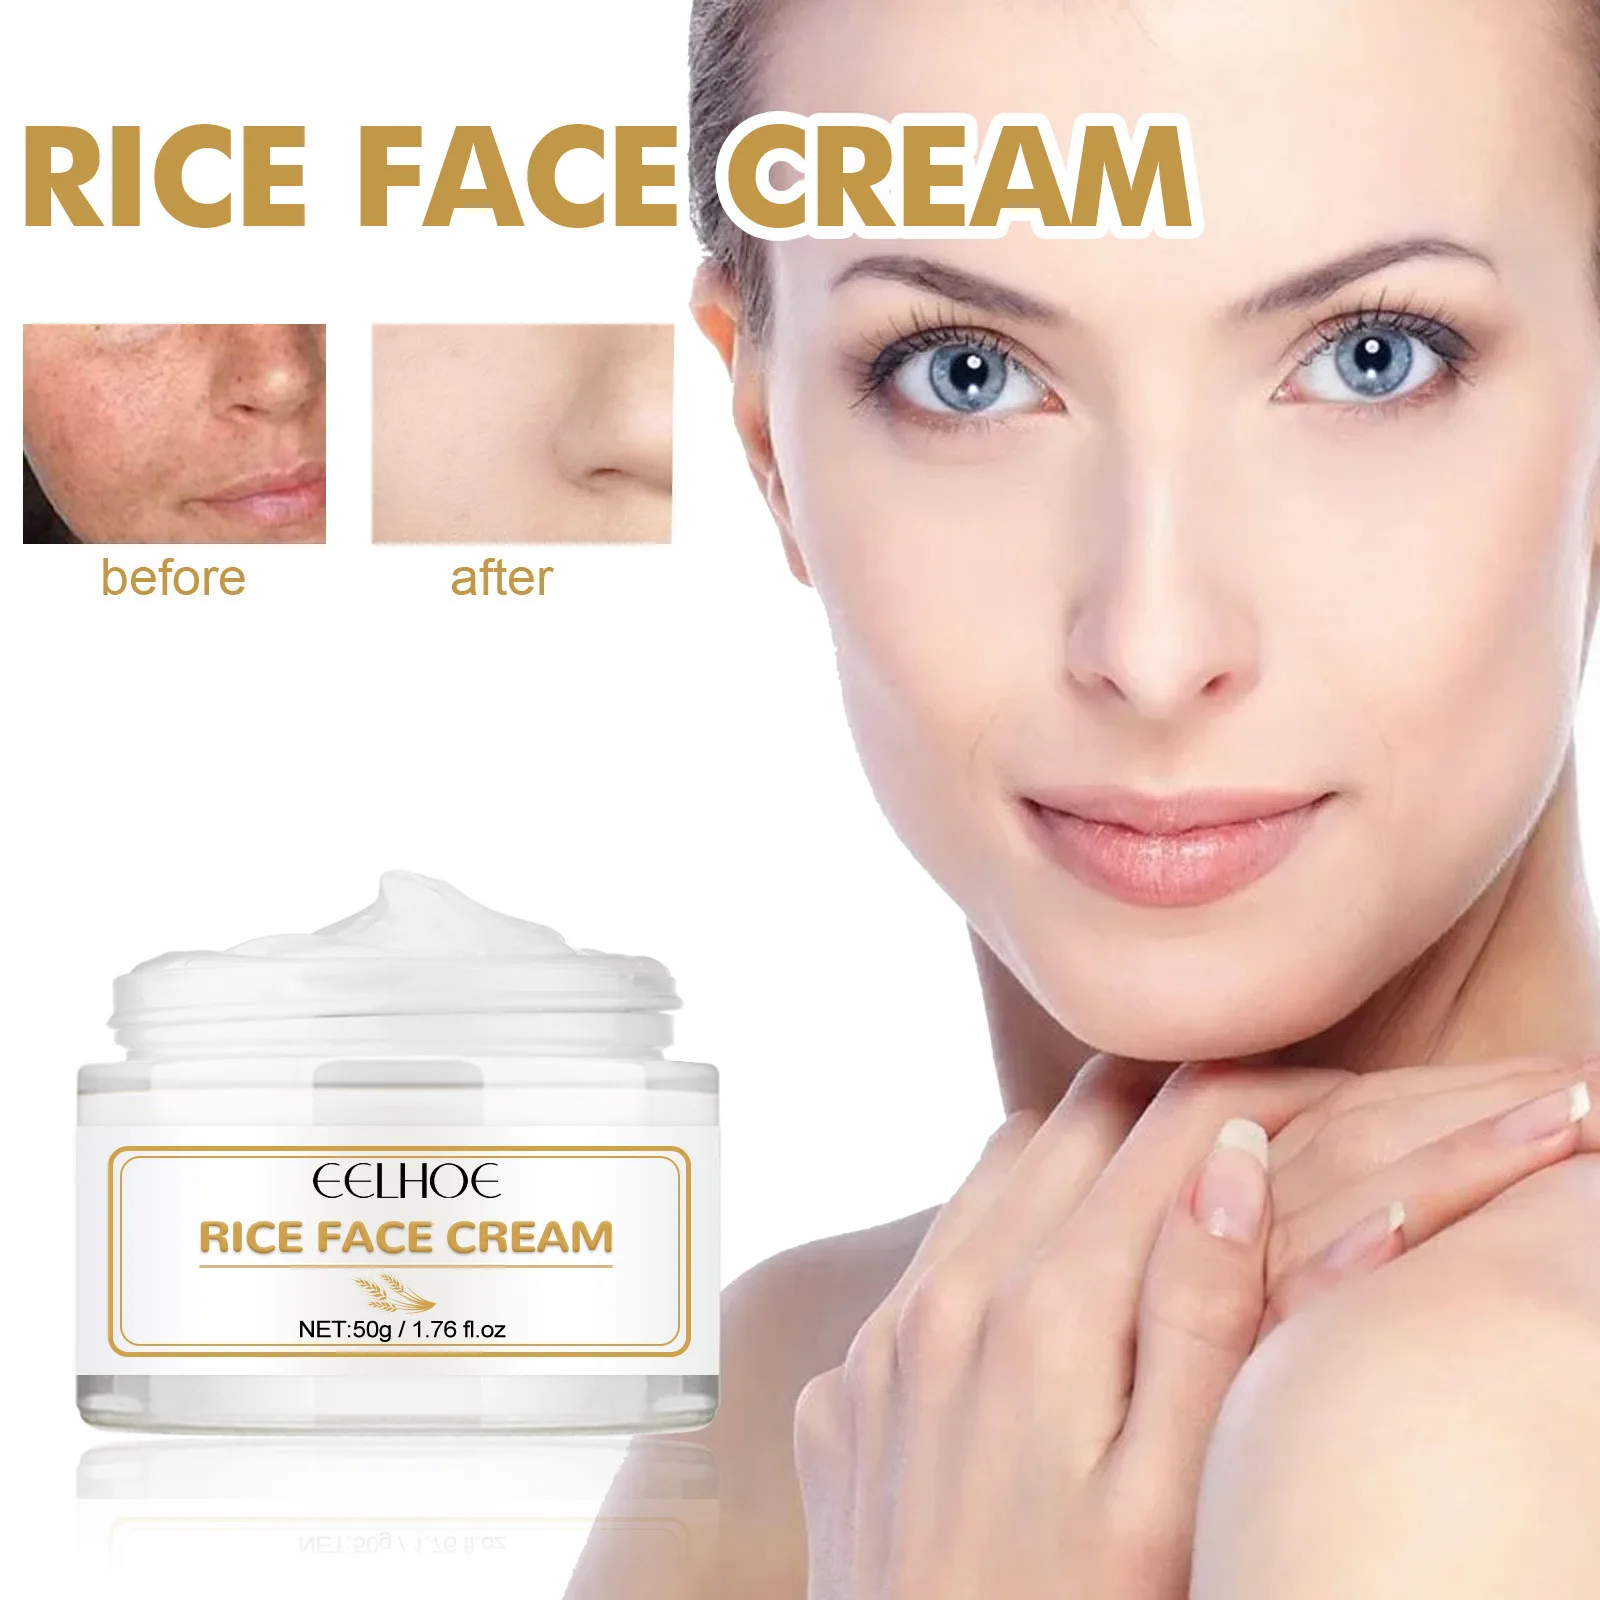 

Shrink Pore Deep Hydrated Rice Face Cream Fade Fine Lines Remove Dark Spots Moisturizing Tightening Whitening Skin Care Product